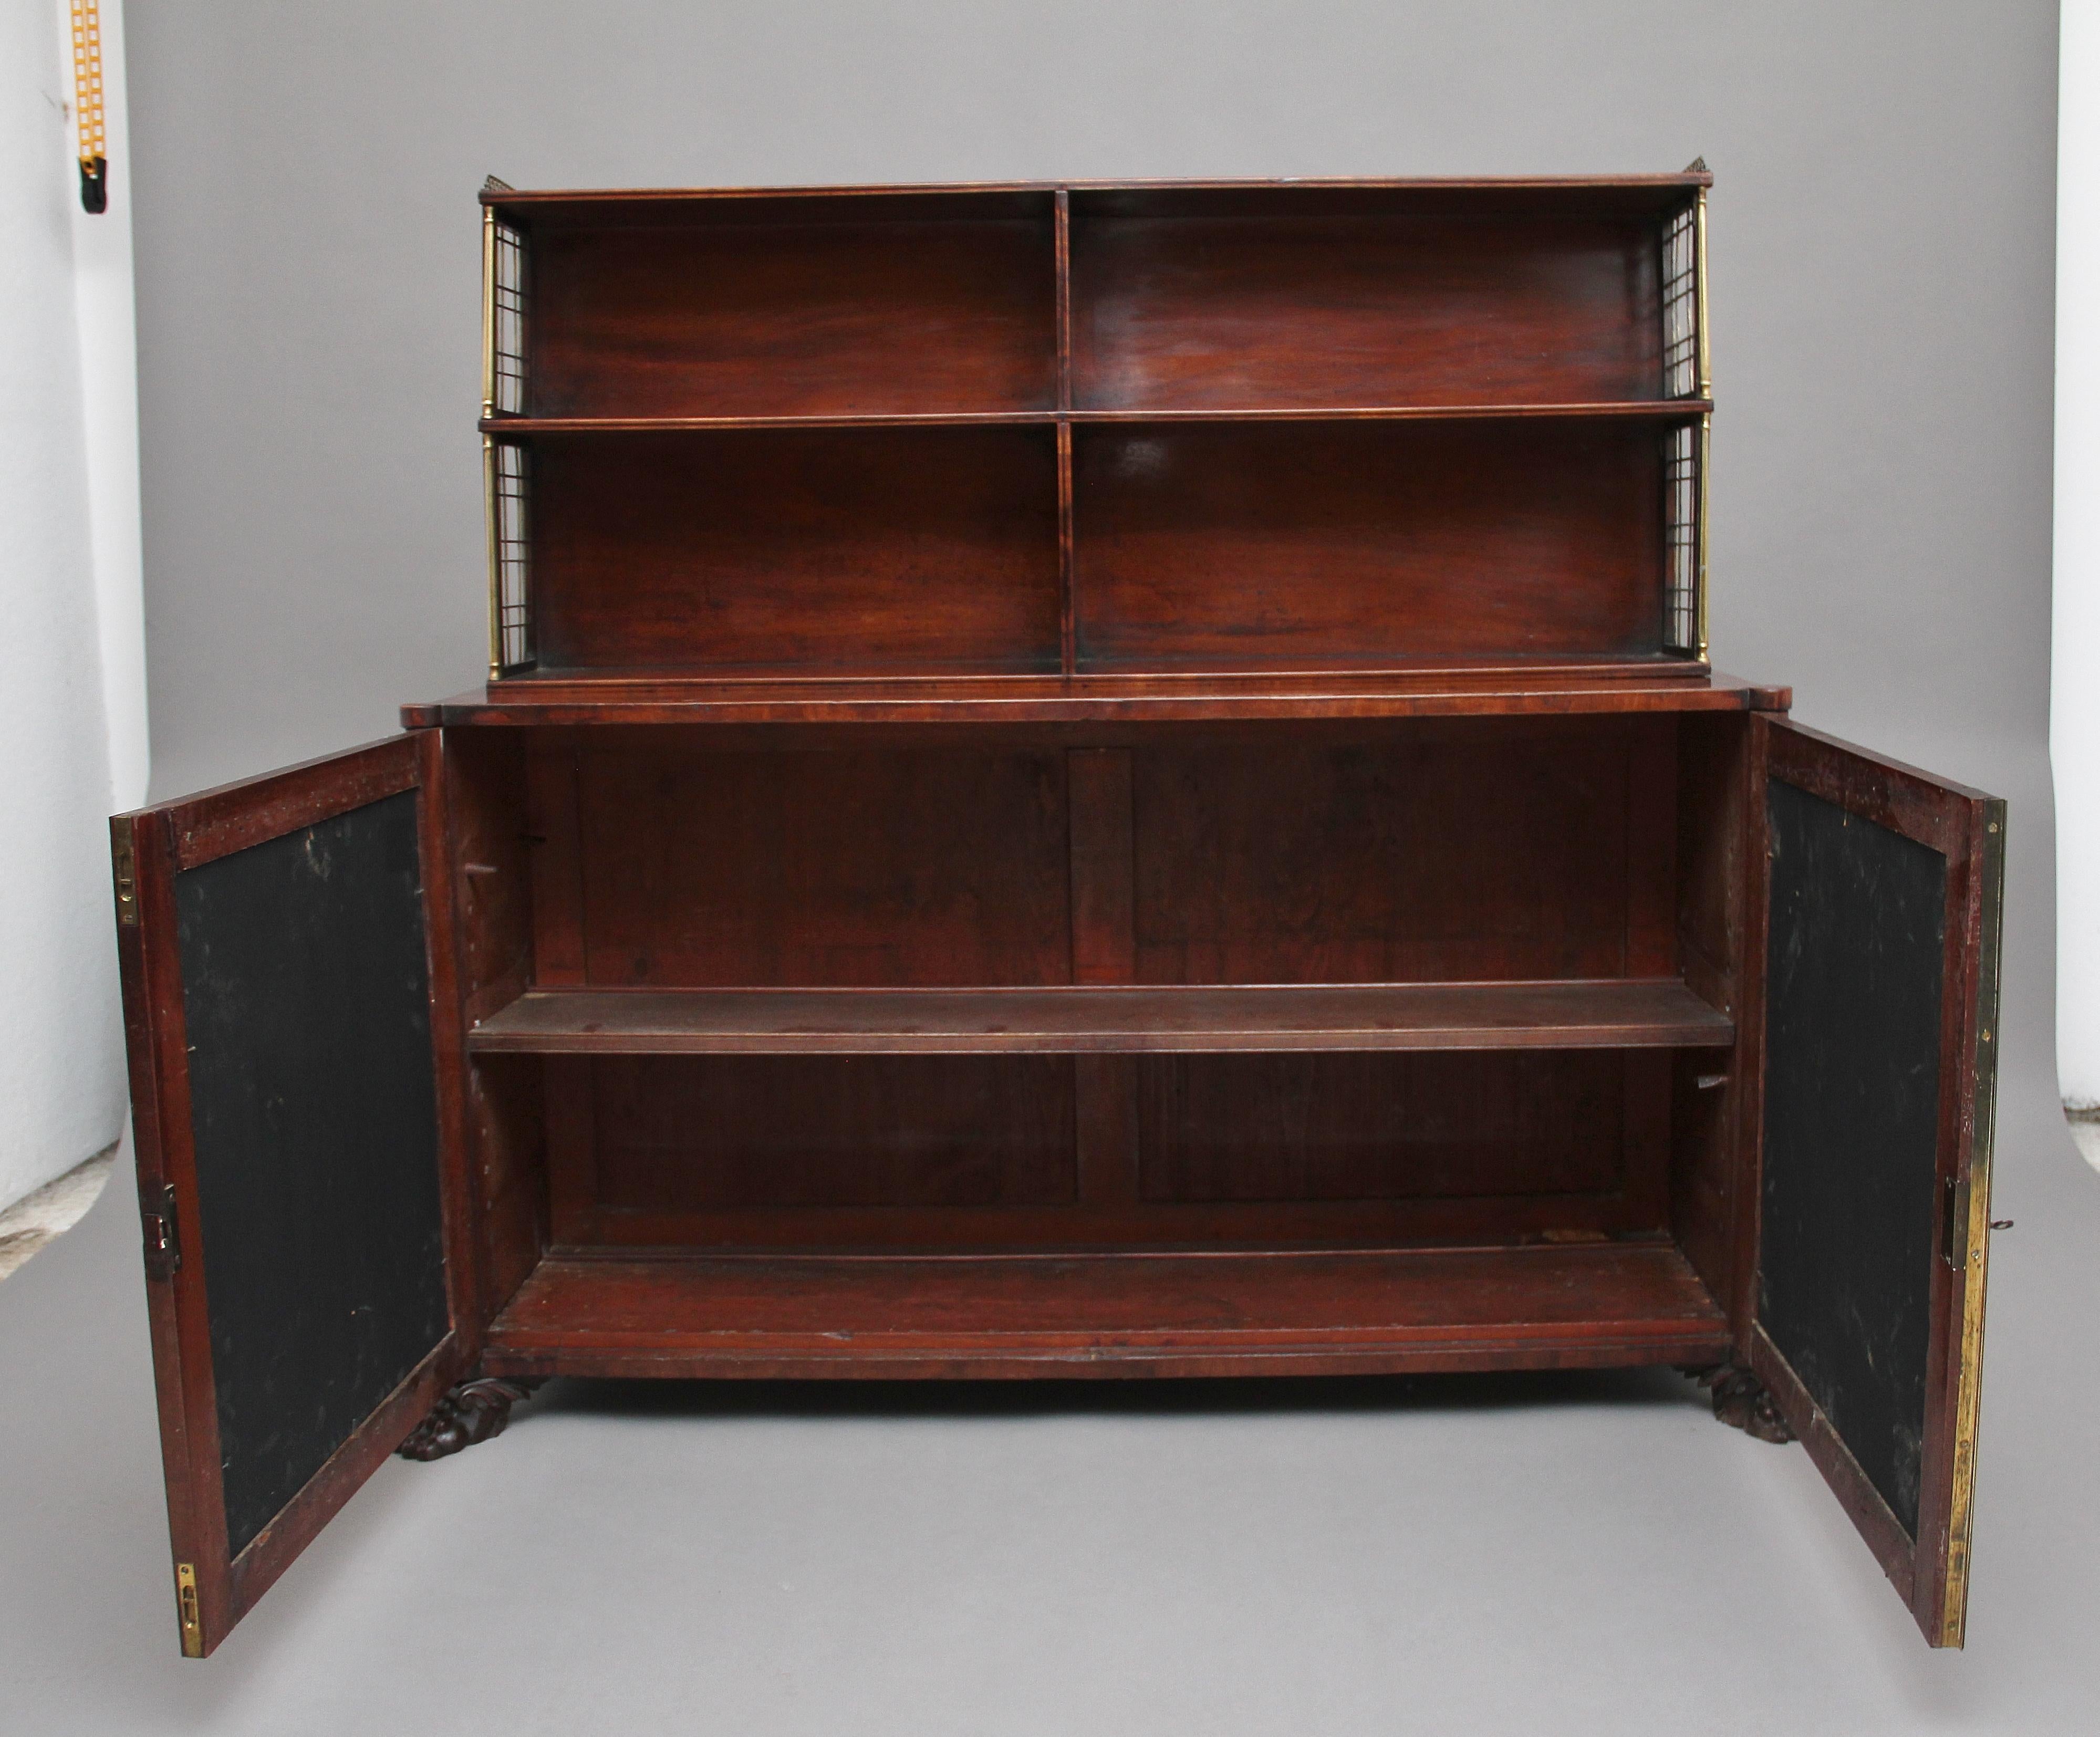 Early 19th Century Mahogany Cabinet In Good Condition For Sale In Martlesham, GB